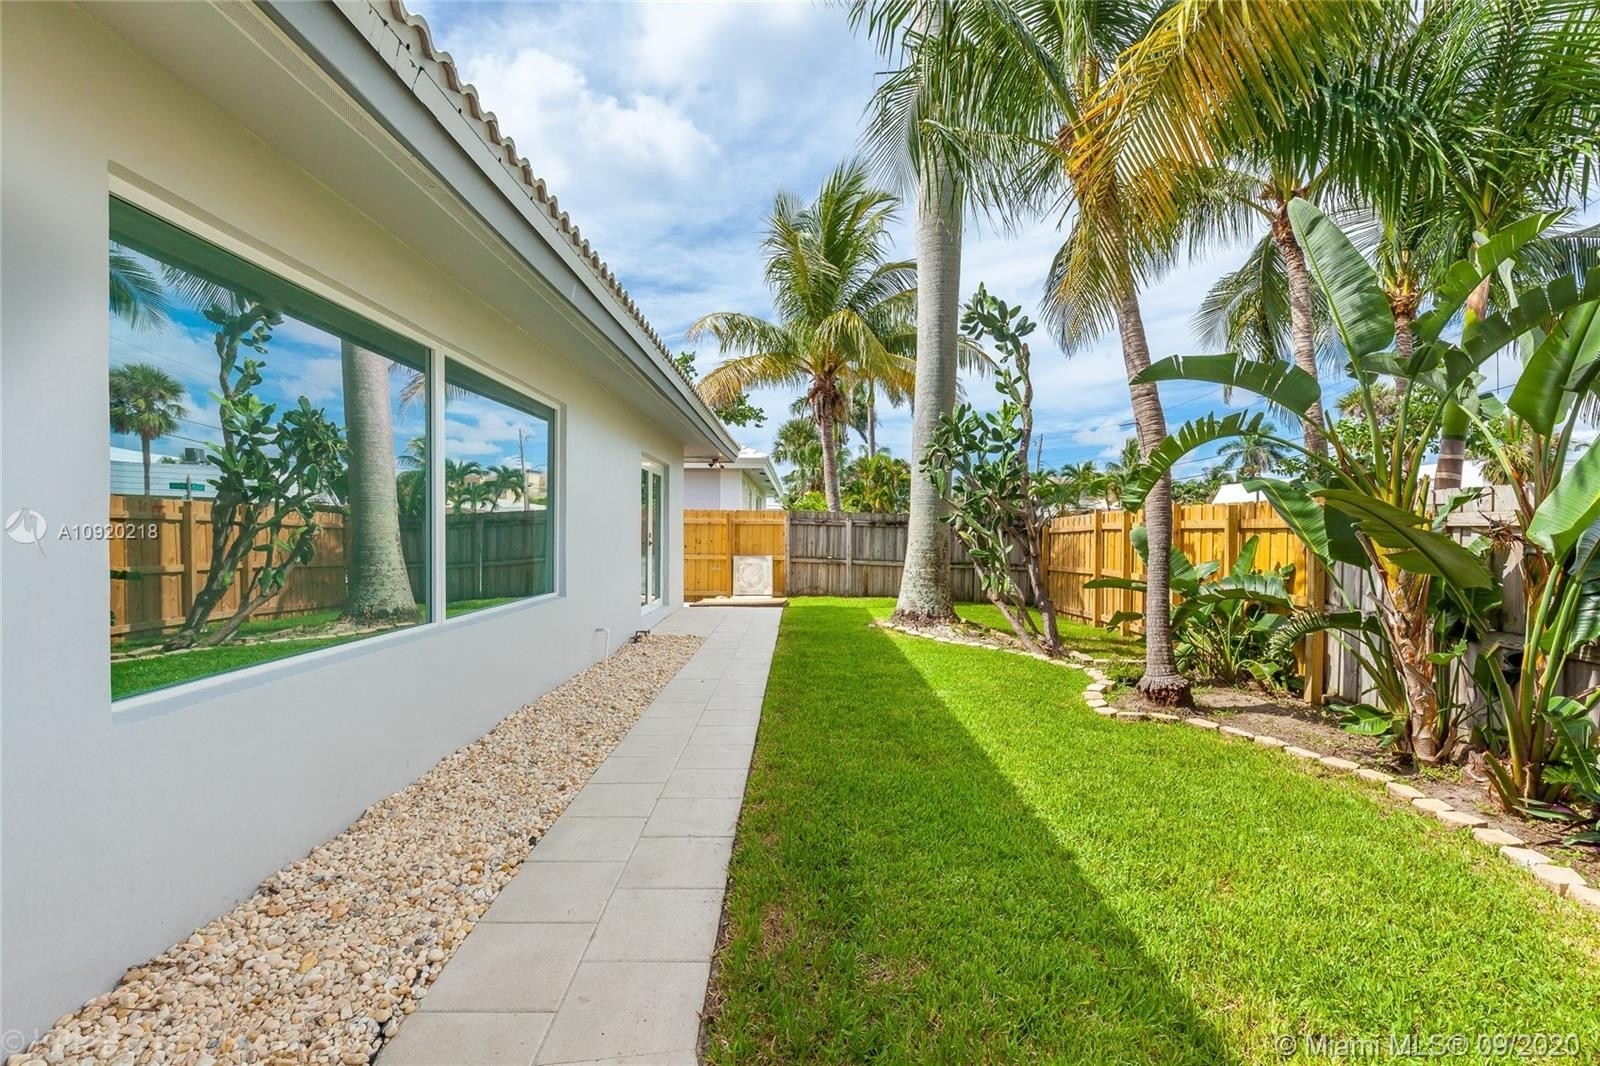 36. Rentals at 2706 NE 32nd Ave, 1 Fort Lauderdale